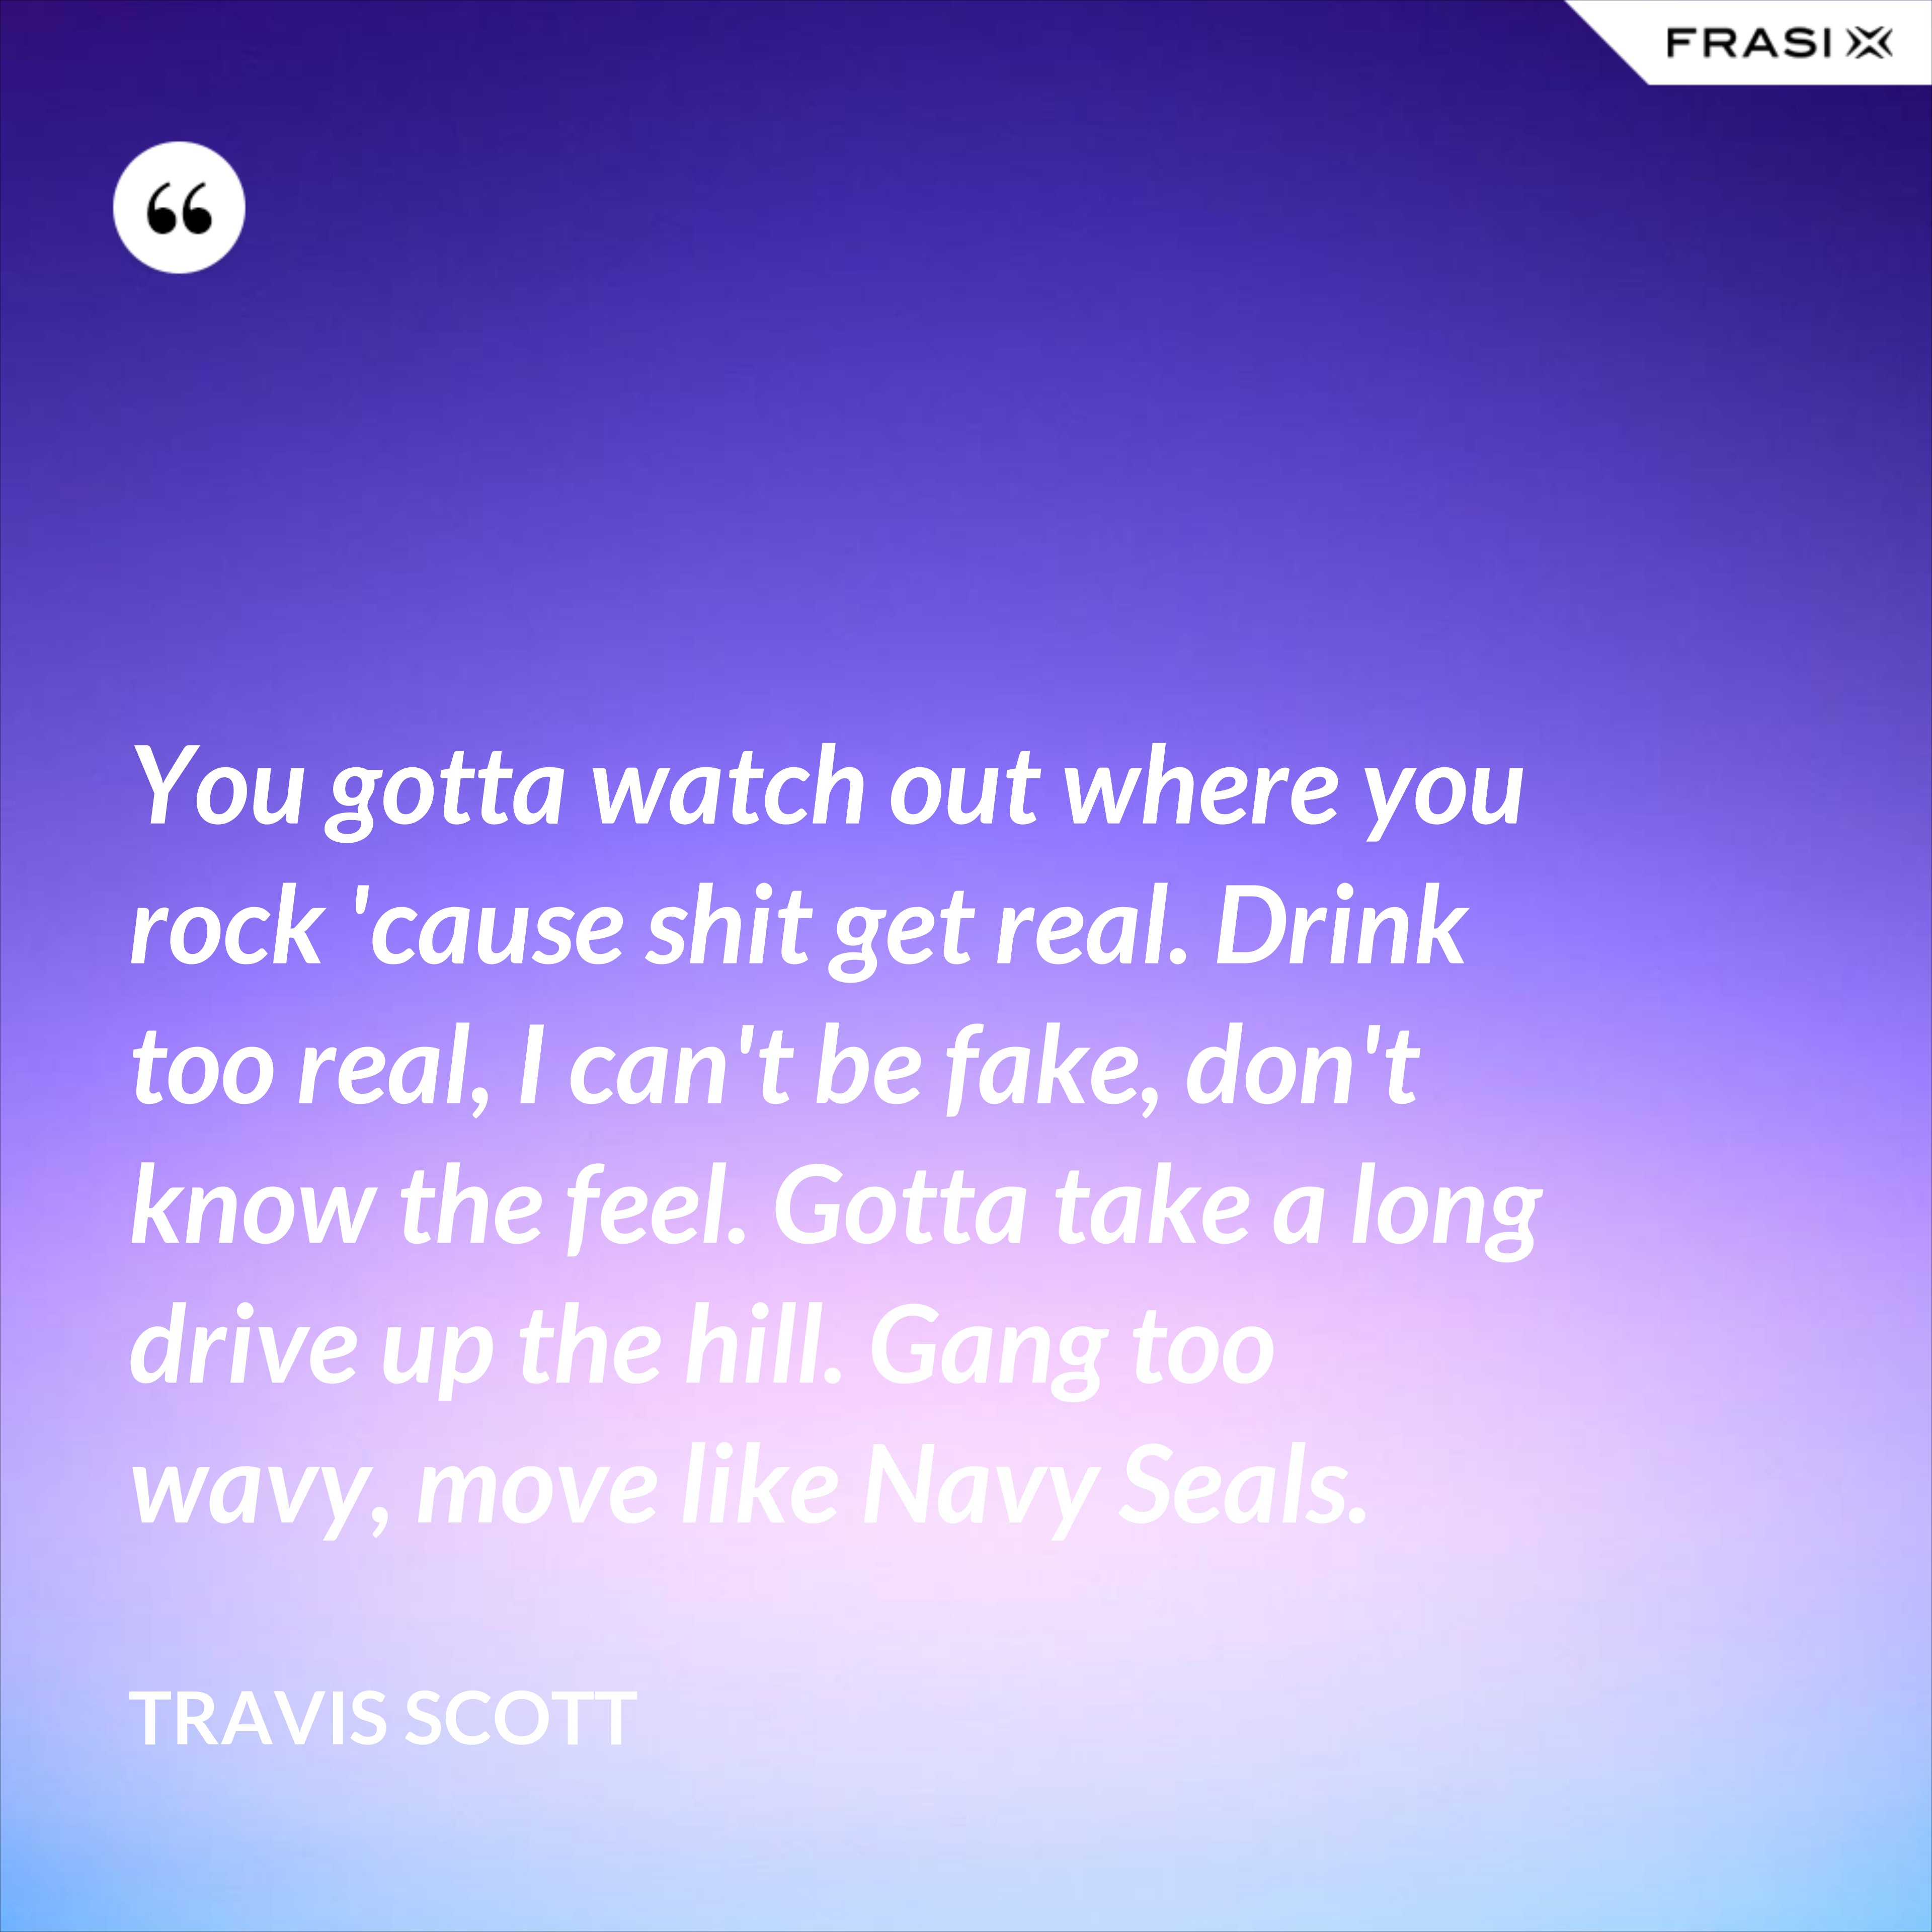 You gotta watch out where you rock 'cause shit get real. Drink too real, I can't be fake, don't know the feel. Gotta take a long drive up the hill. Gang too wavy, move like Navy Seals. - Travis Scott